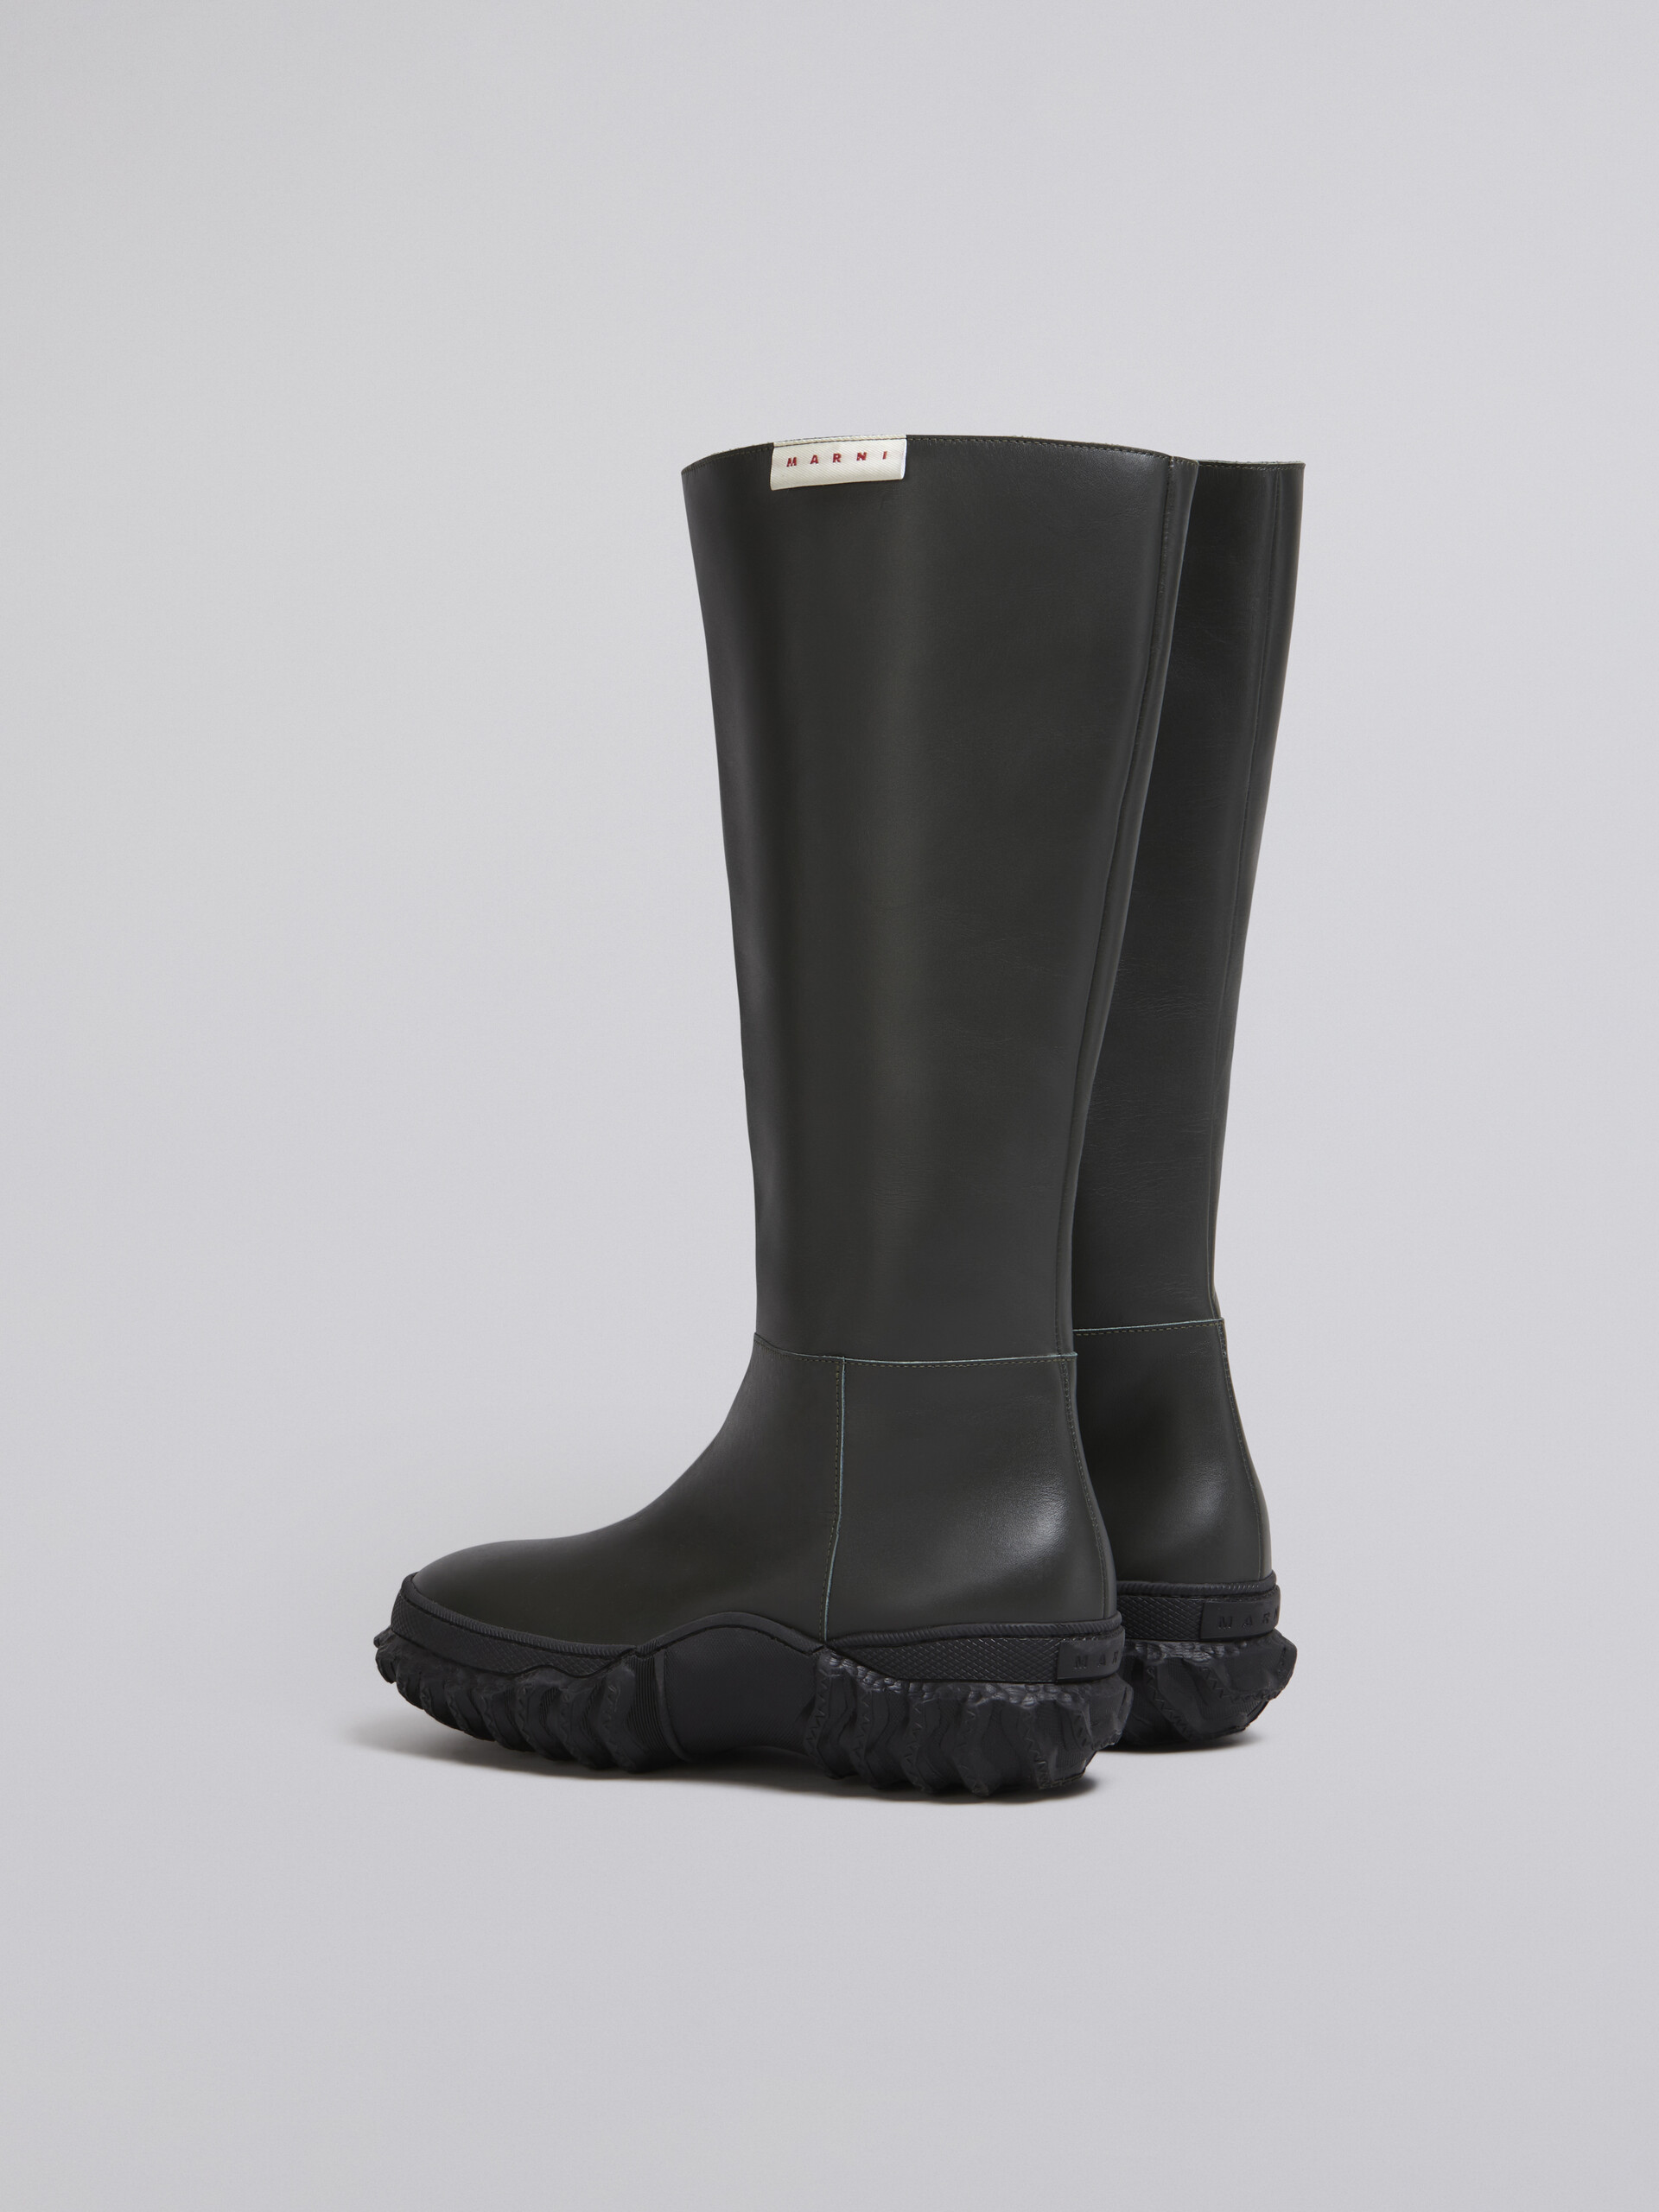 Smooth calfskin boot with wavy rubber sole - Boots - Image 3